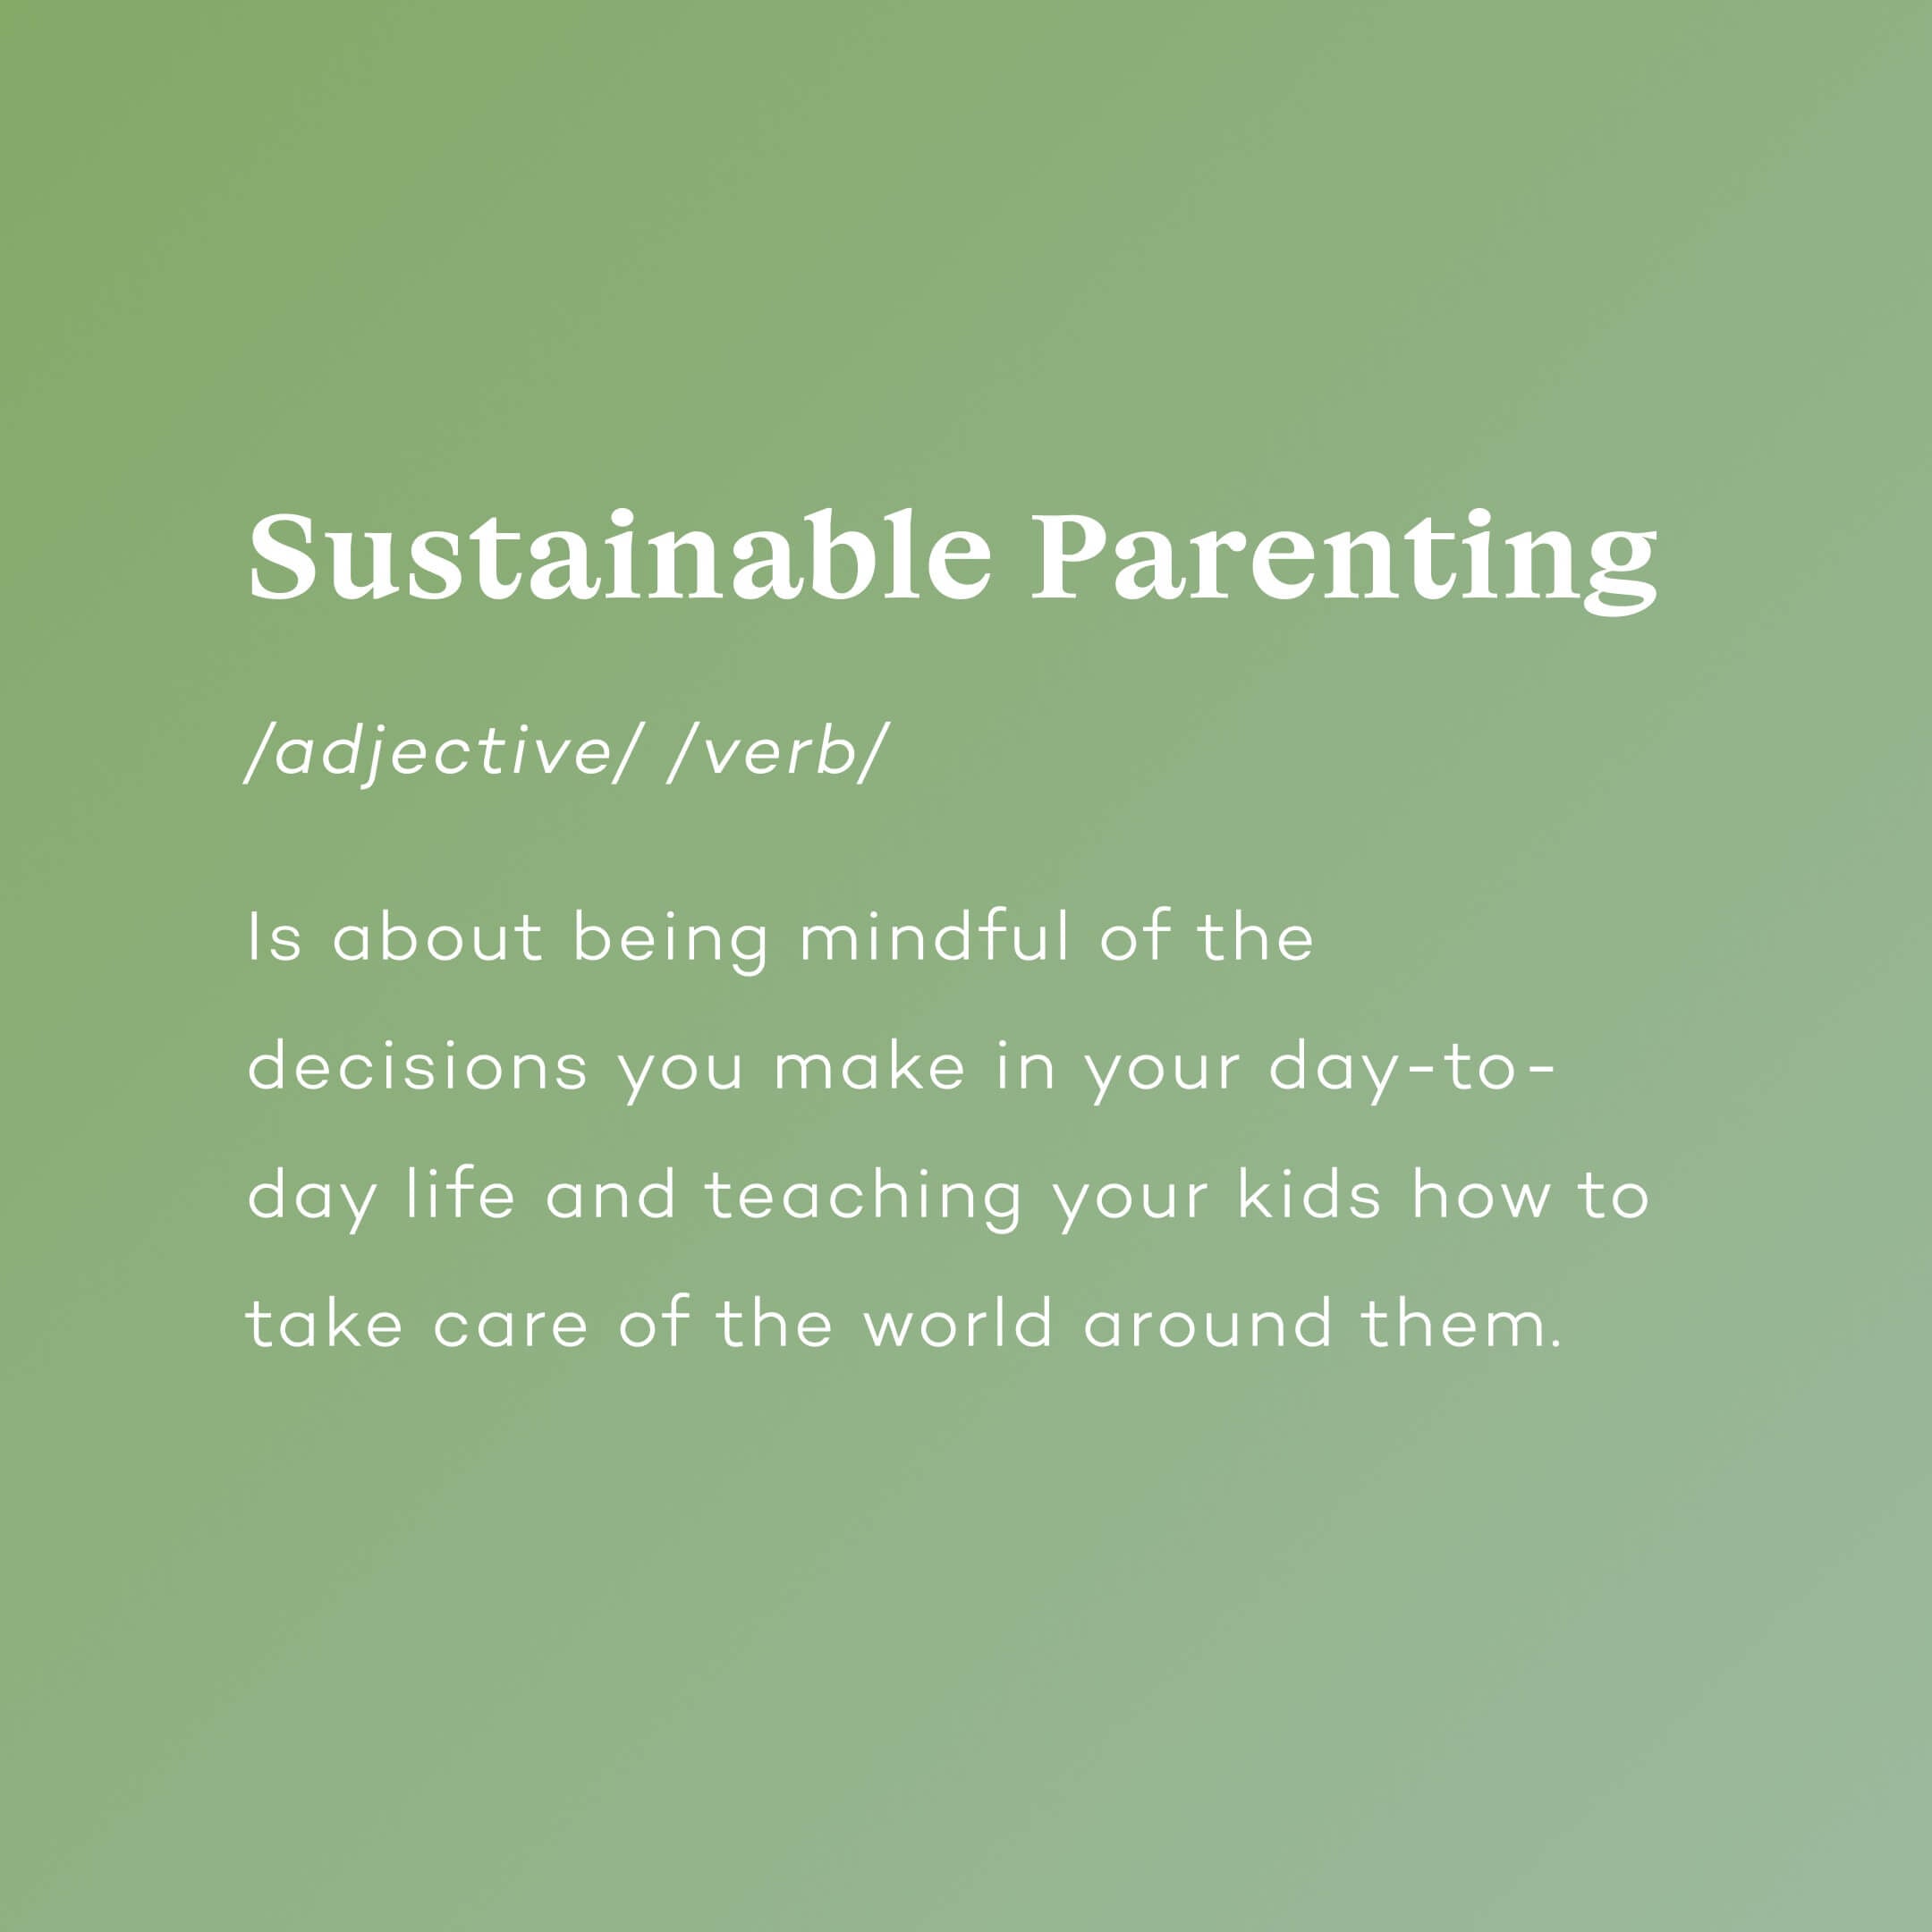 Sustainable parenting is about being mindful of the decisions you make in your day-to-day life and teaching your kids how to take care of the world around them.